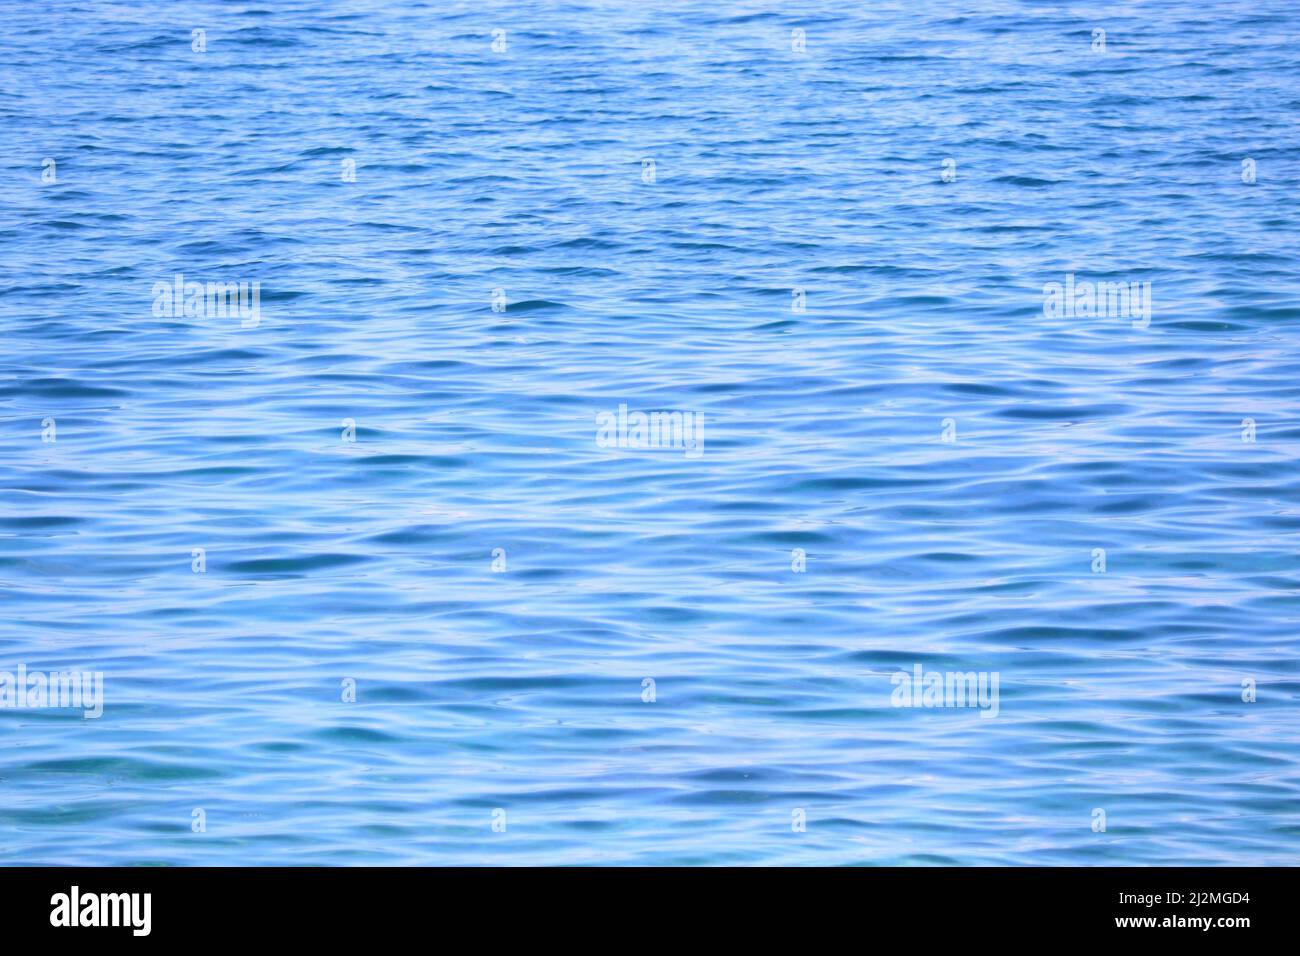 blue ripped water in the sea as background Stock Photo